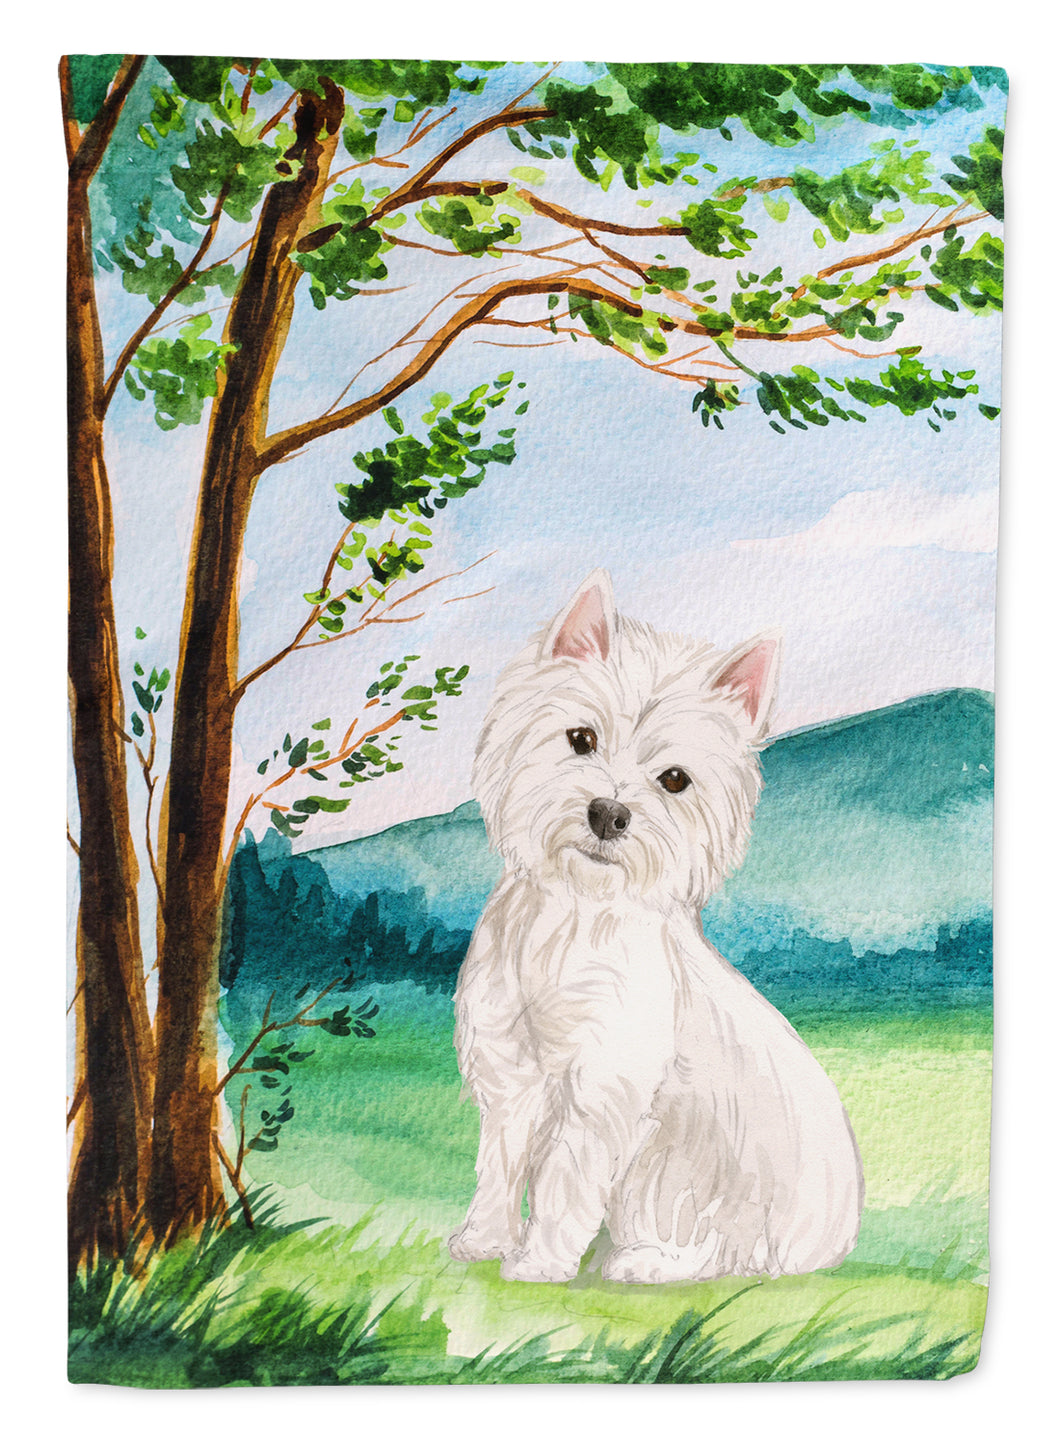 Under the Tree Westie Garden Flag 2-Sided 2-Ply